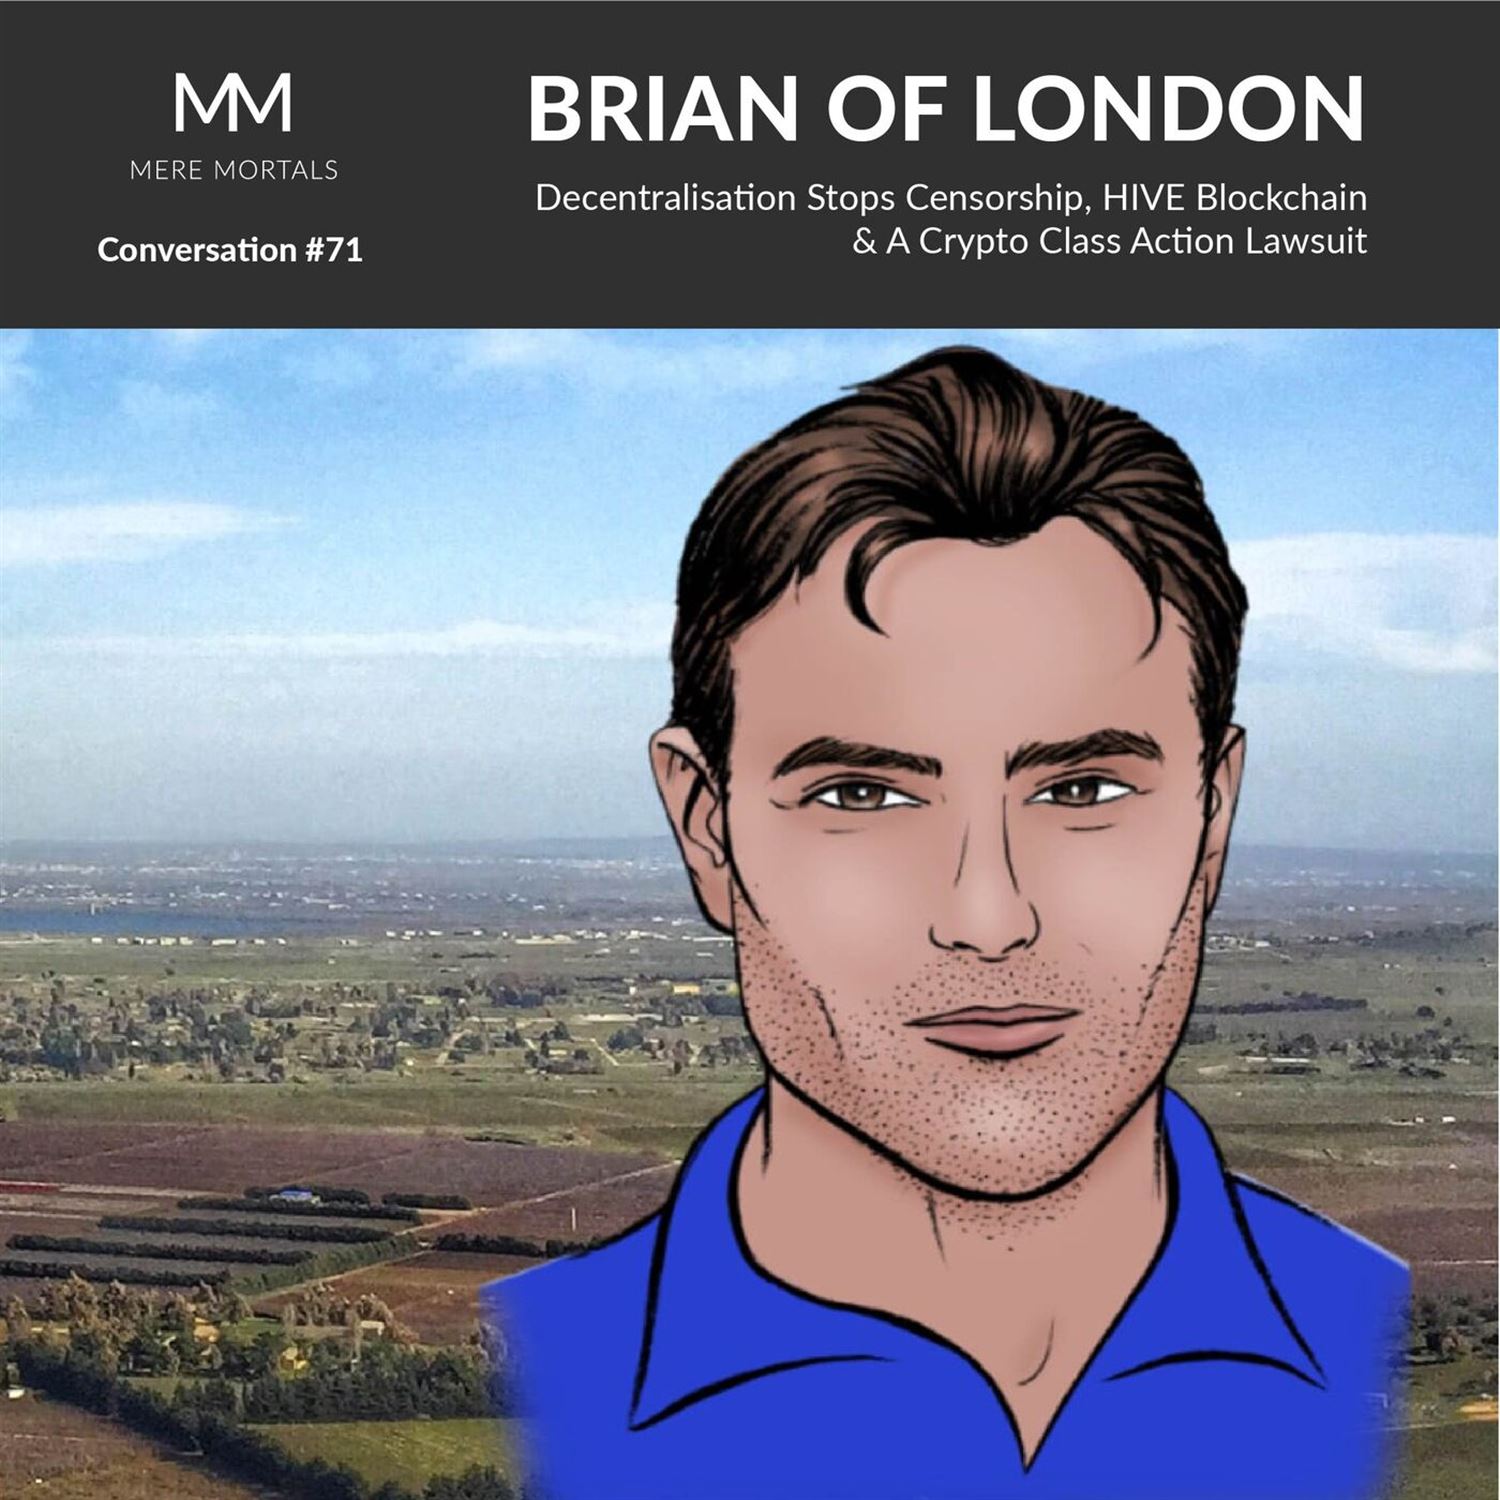 BRIAN OF LONDON | Decentralisation Stops Censorship, HIVE Blockchain & A Crypto Class Action Lawsuit